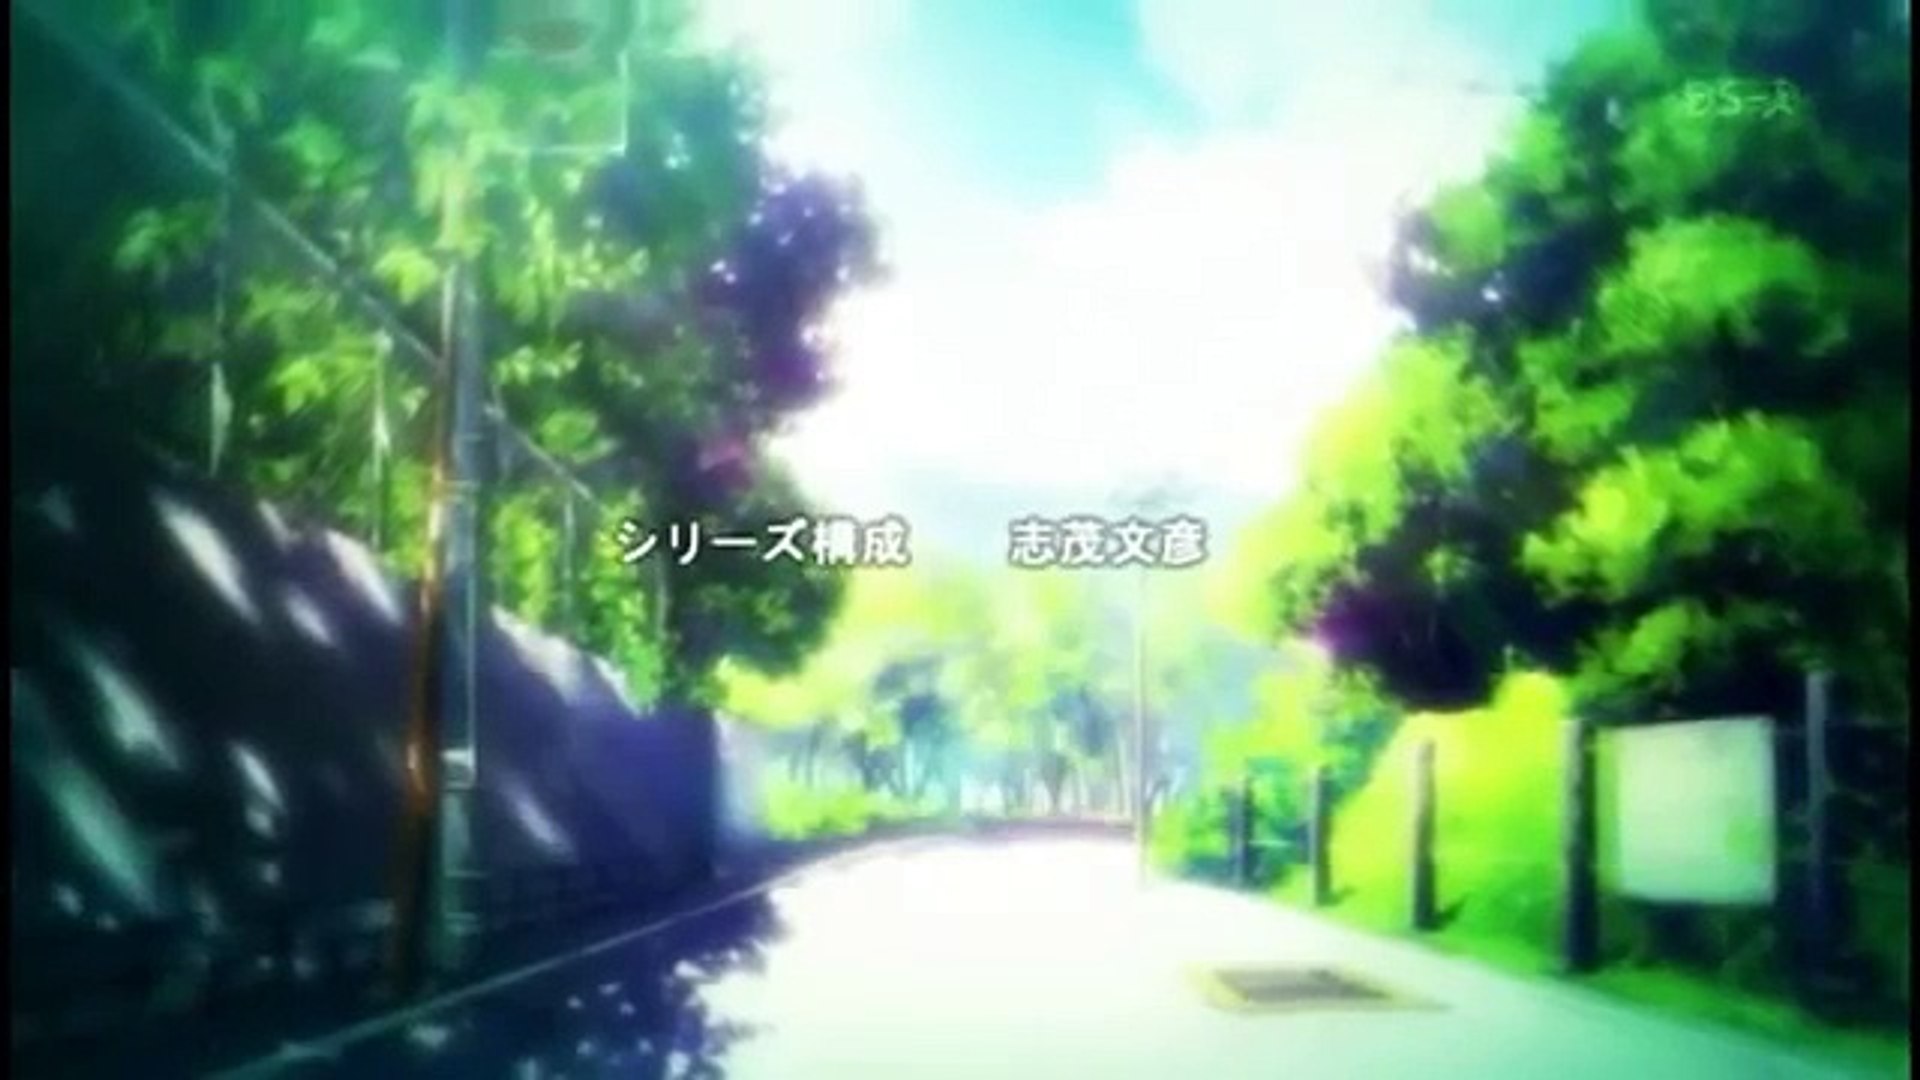 Stream Clannad After Story Op (Full) by zerootu